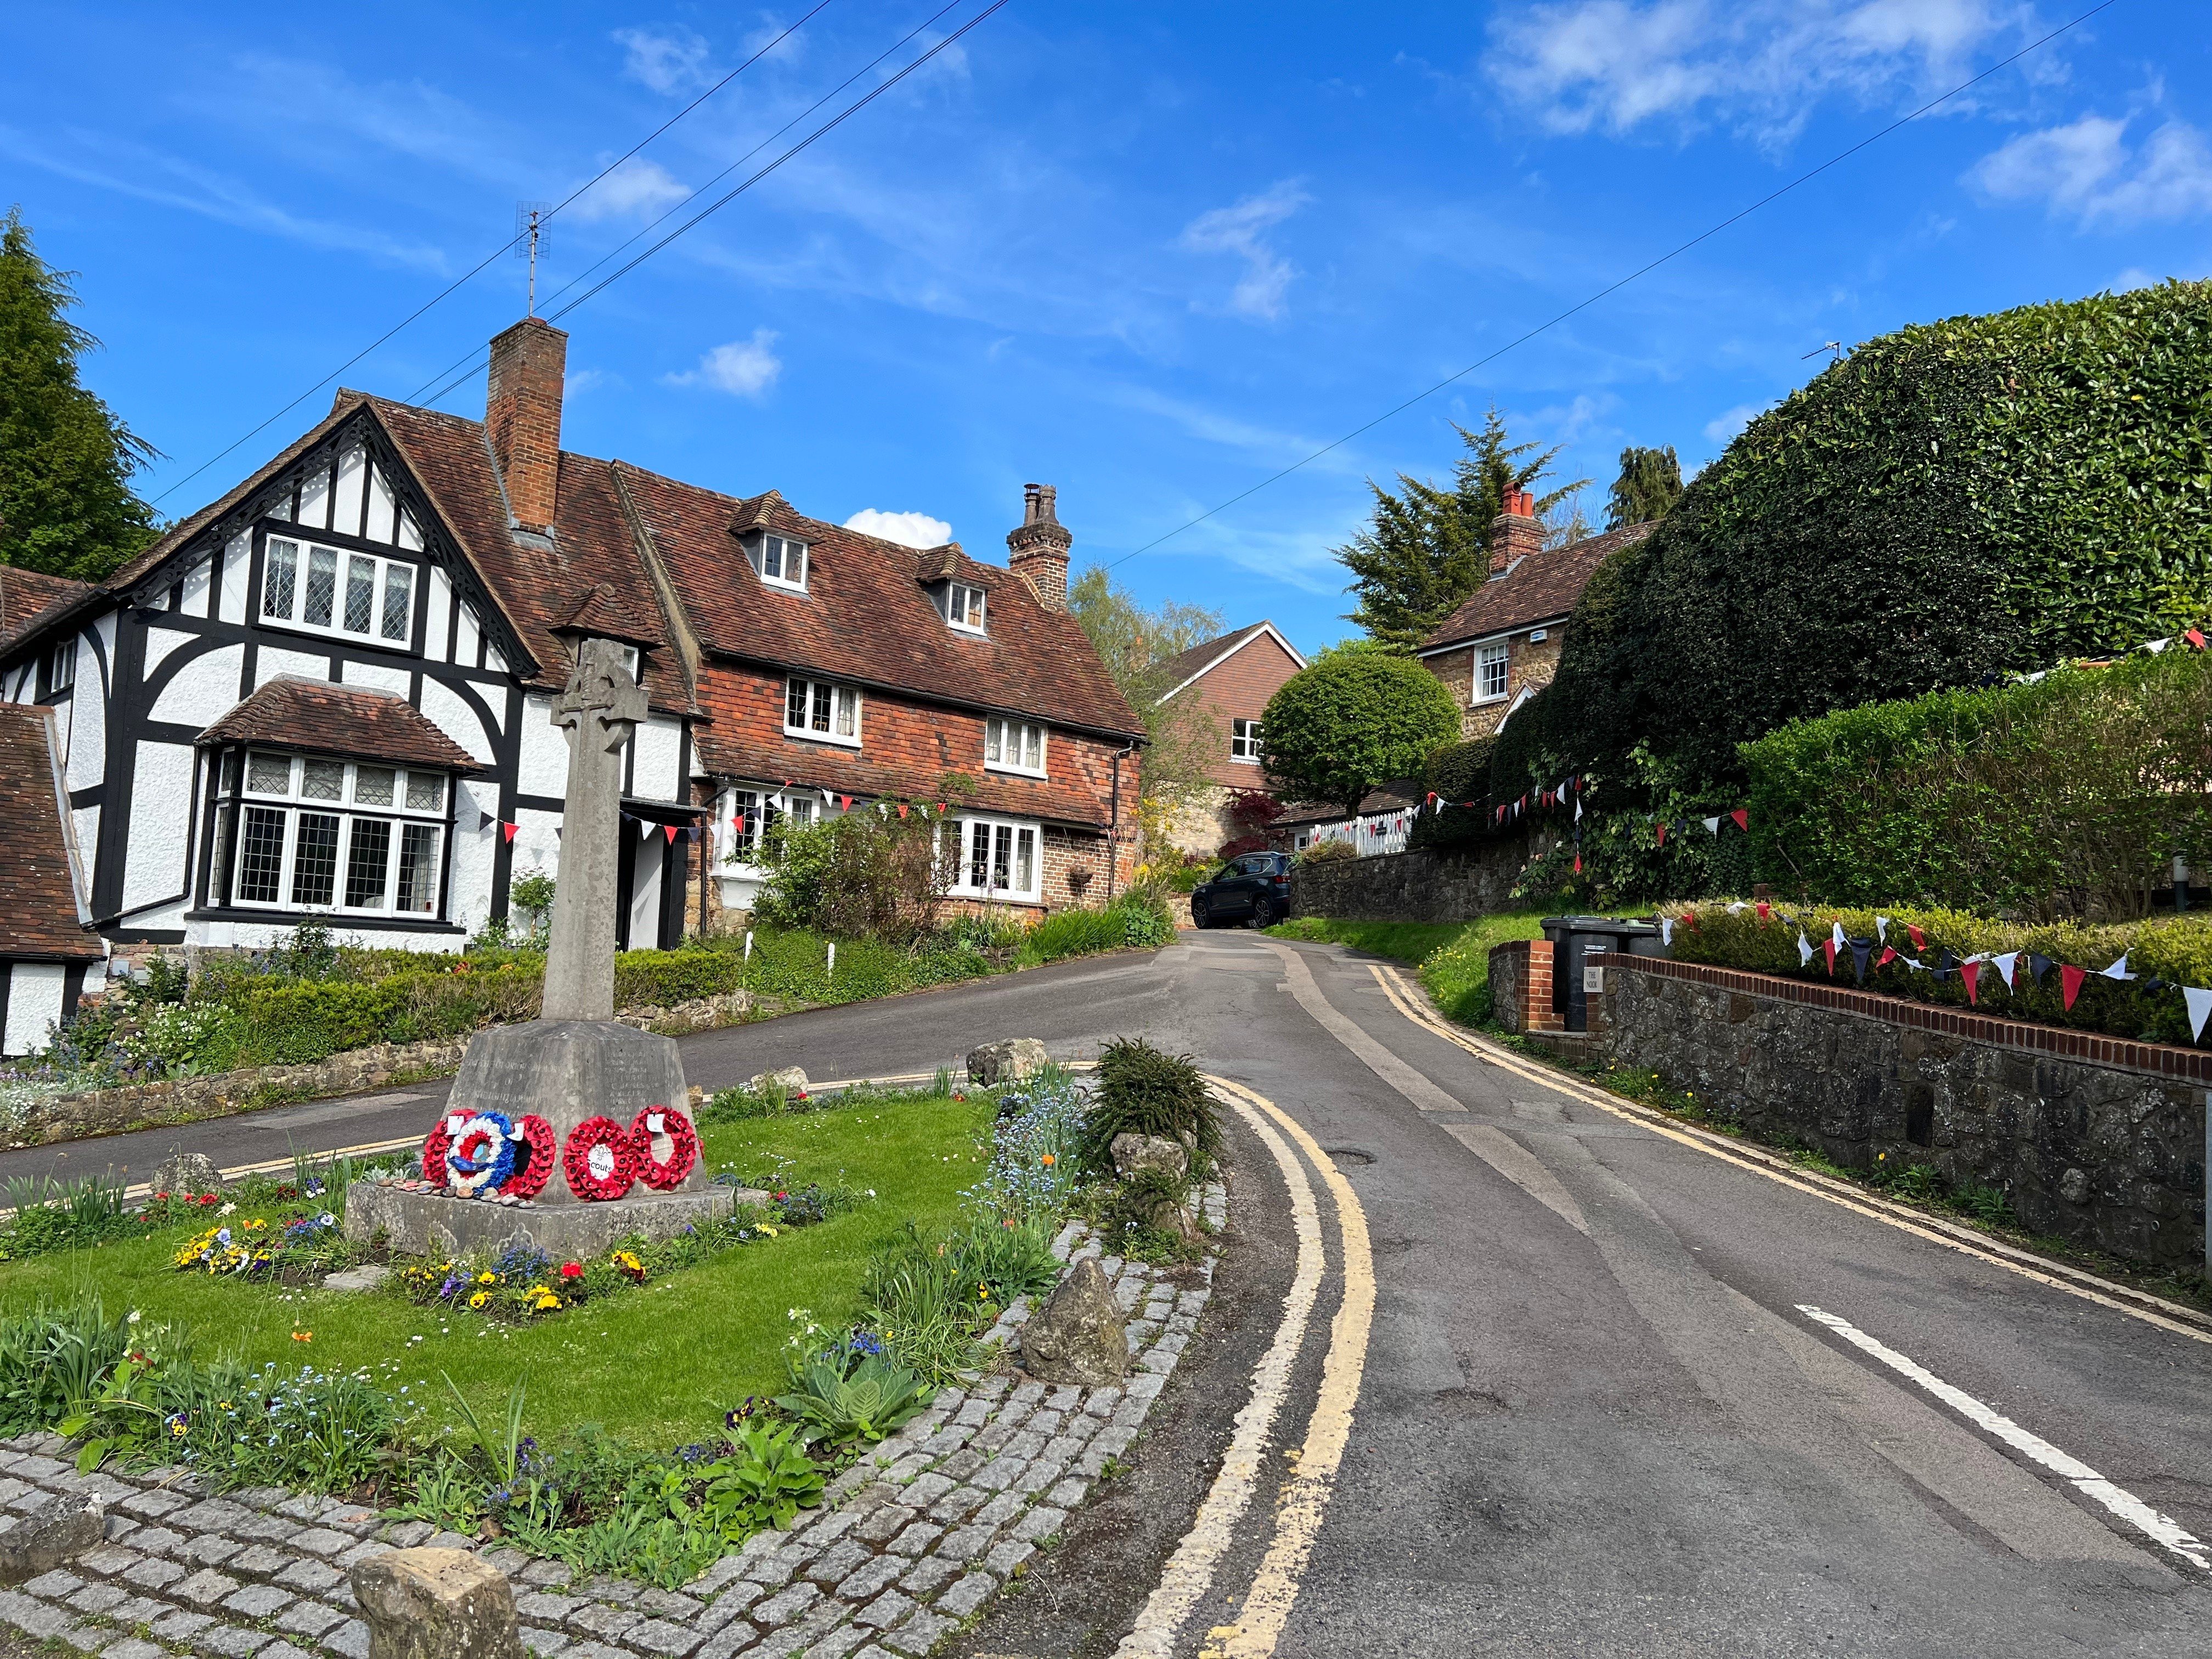 Life in a village in Kent is a big contrast to that in Hong Kong. Photo: Shutterstock